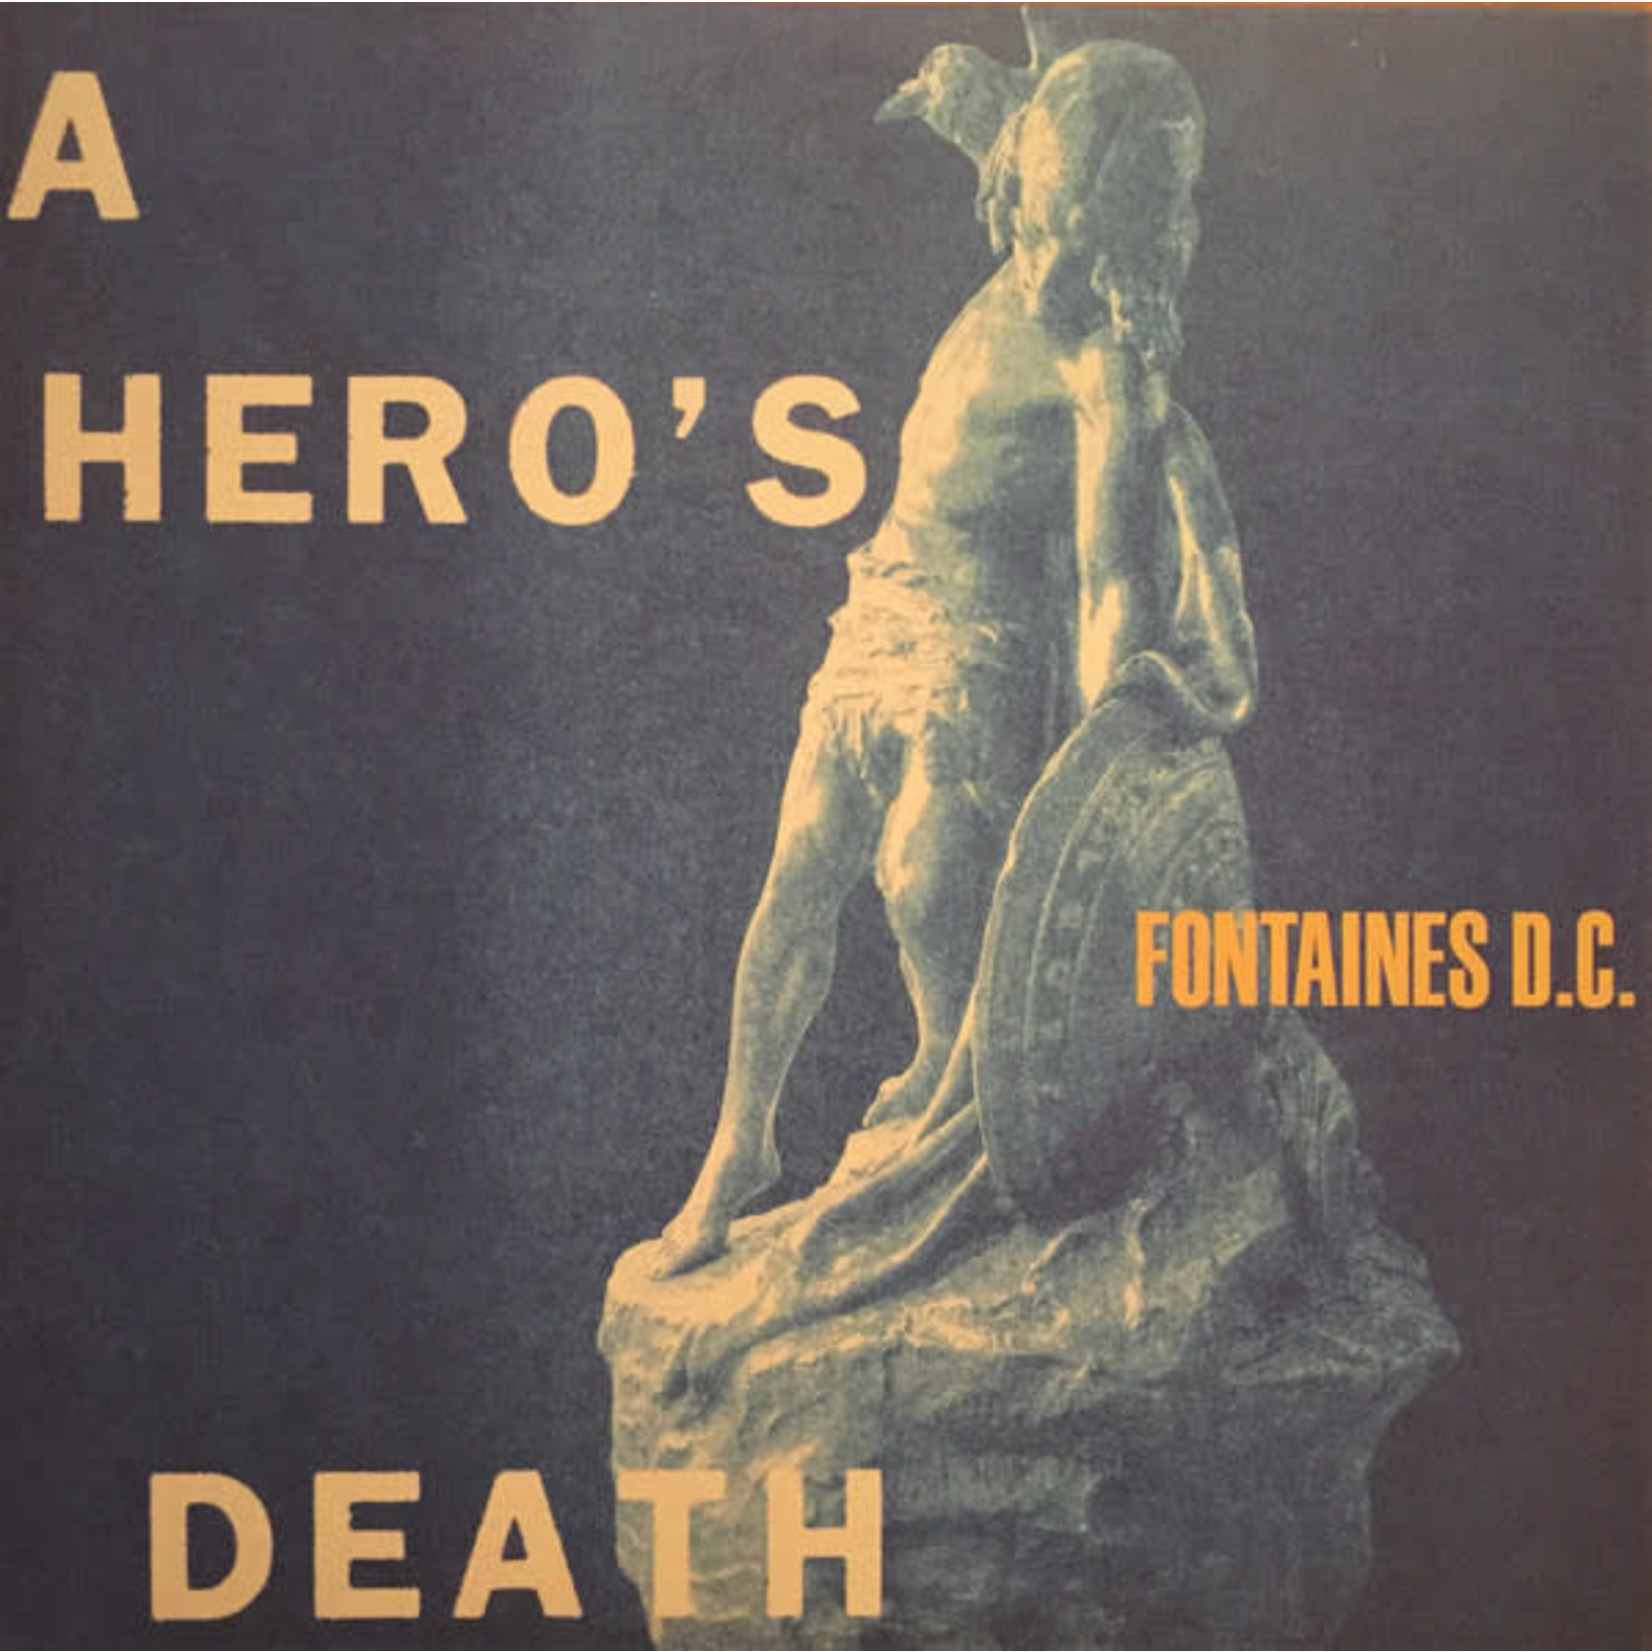 [New] Fontaines D.C.: A Hero's Death (2LP, deluxe) [PARTISAN]